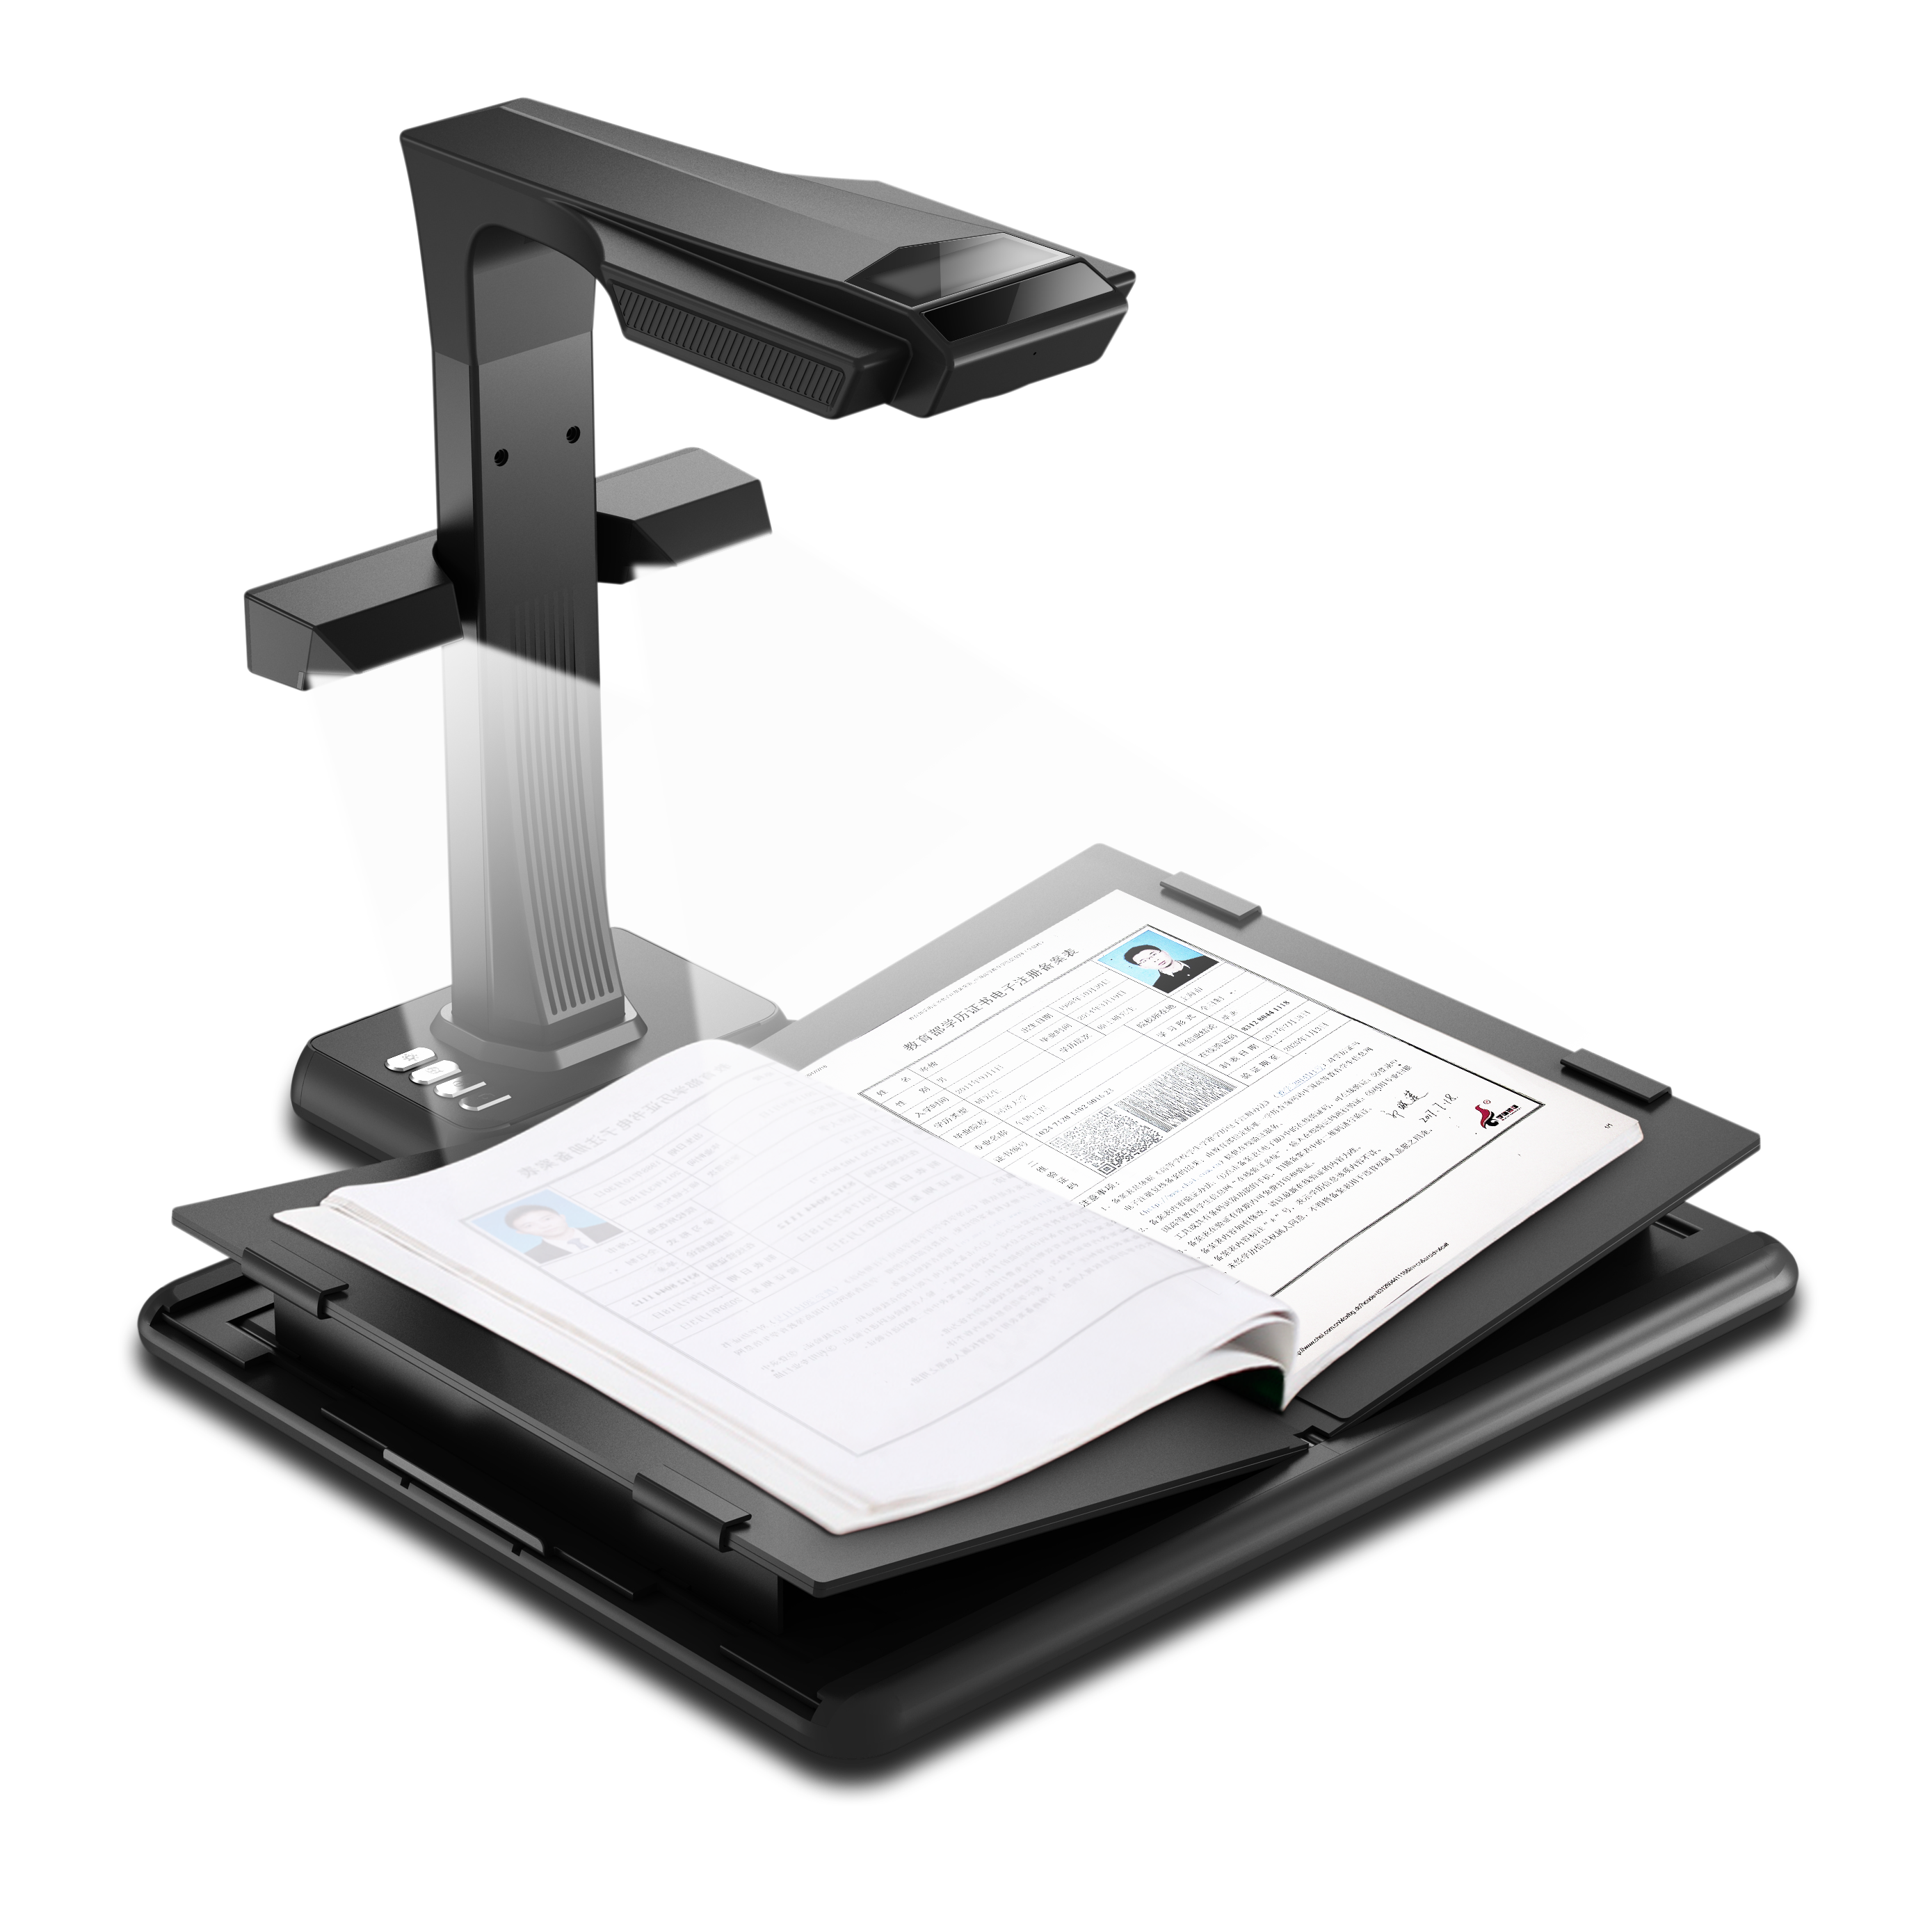 Large Format & Book Scanners